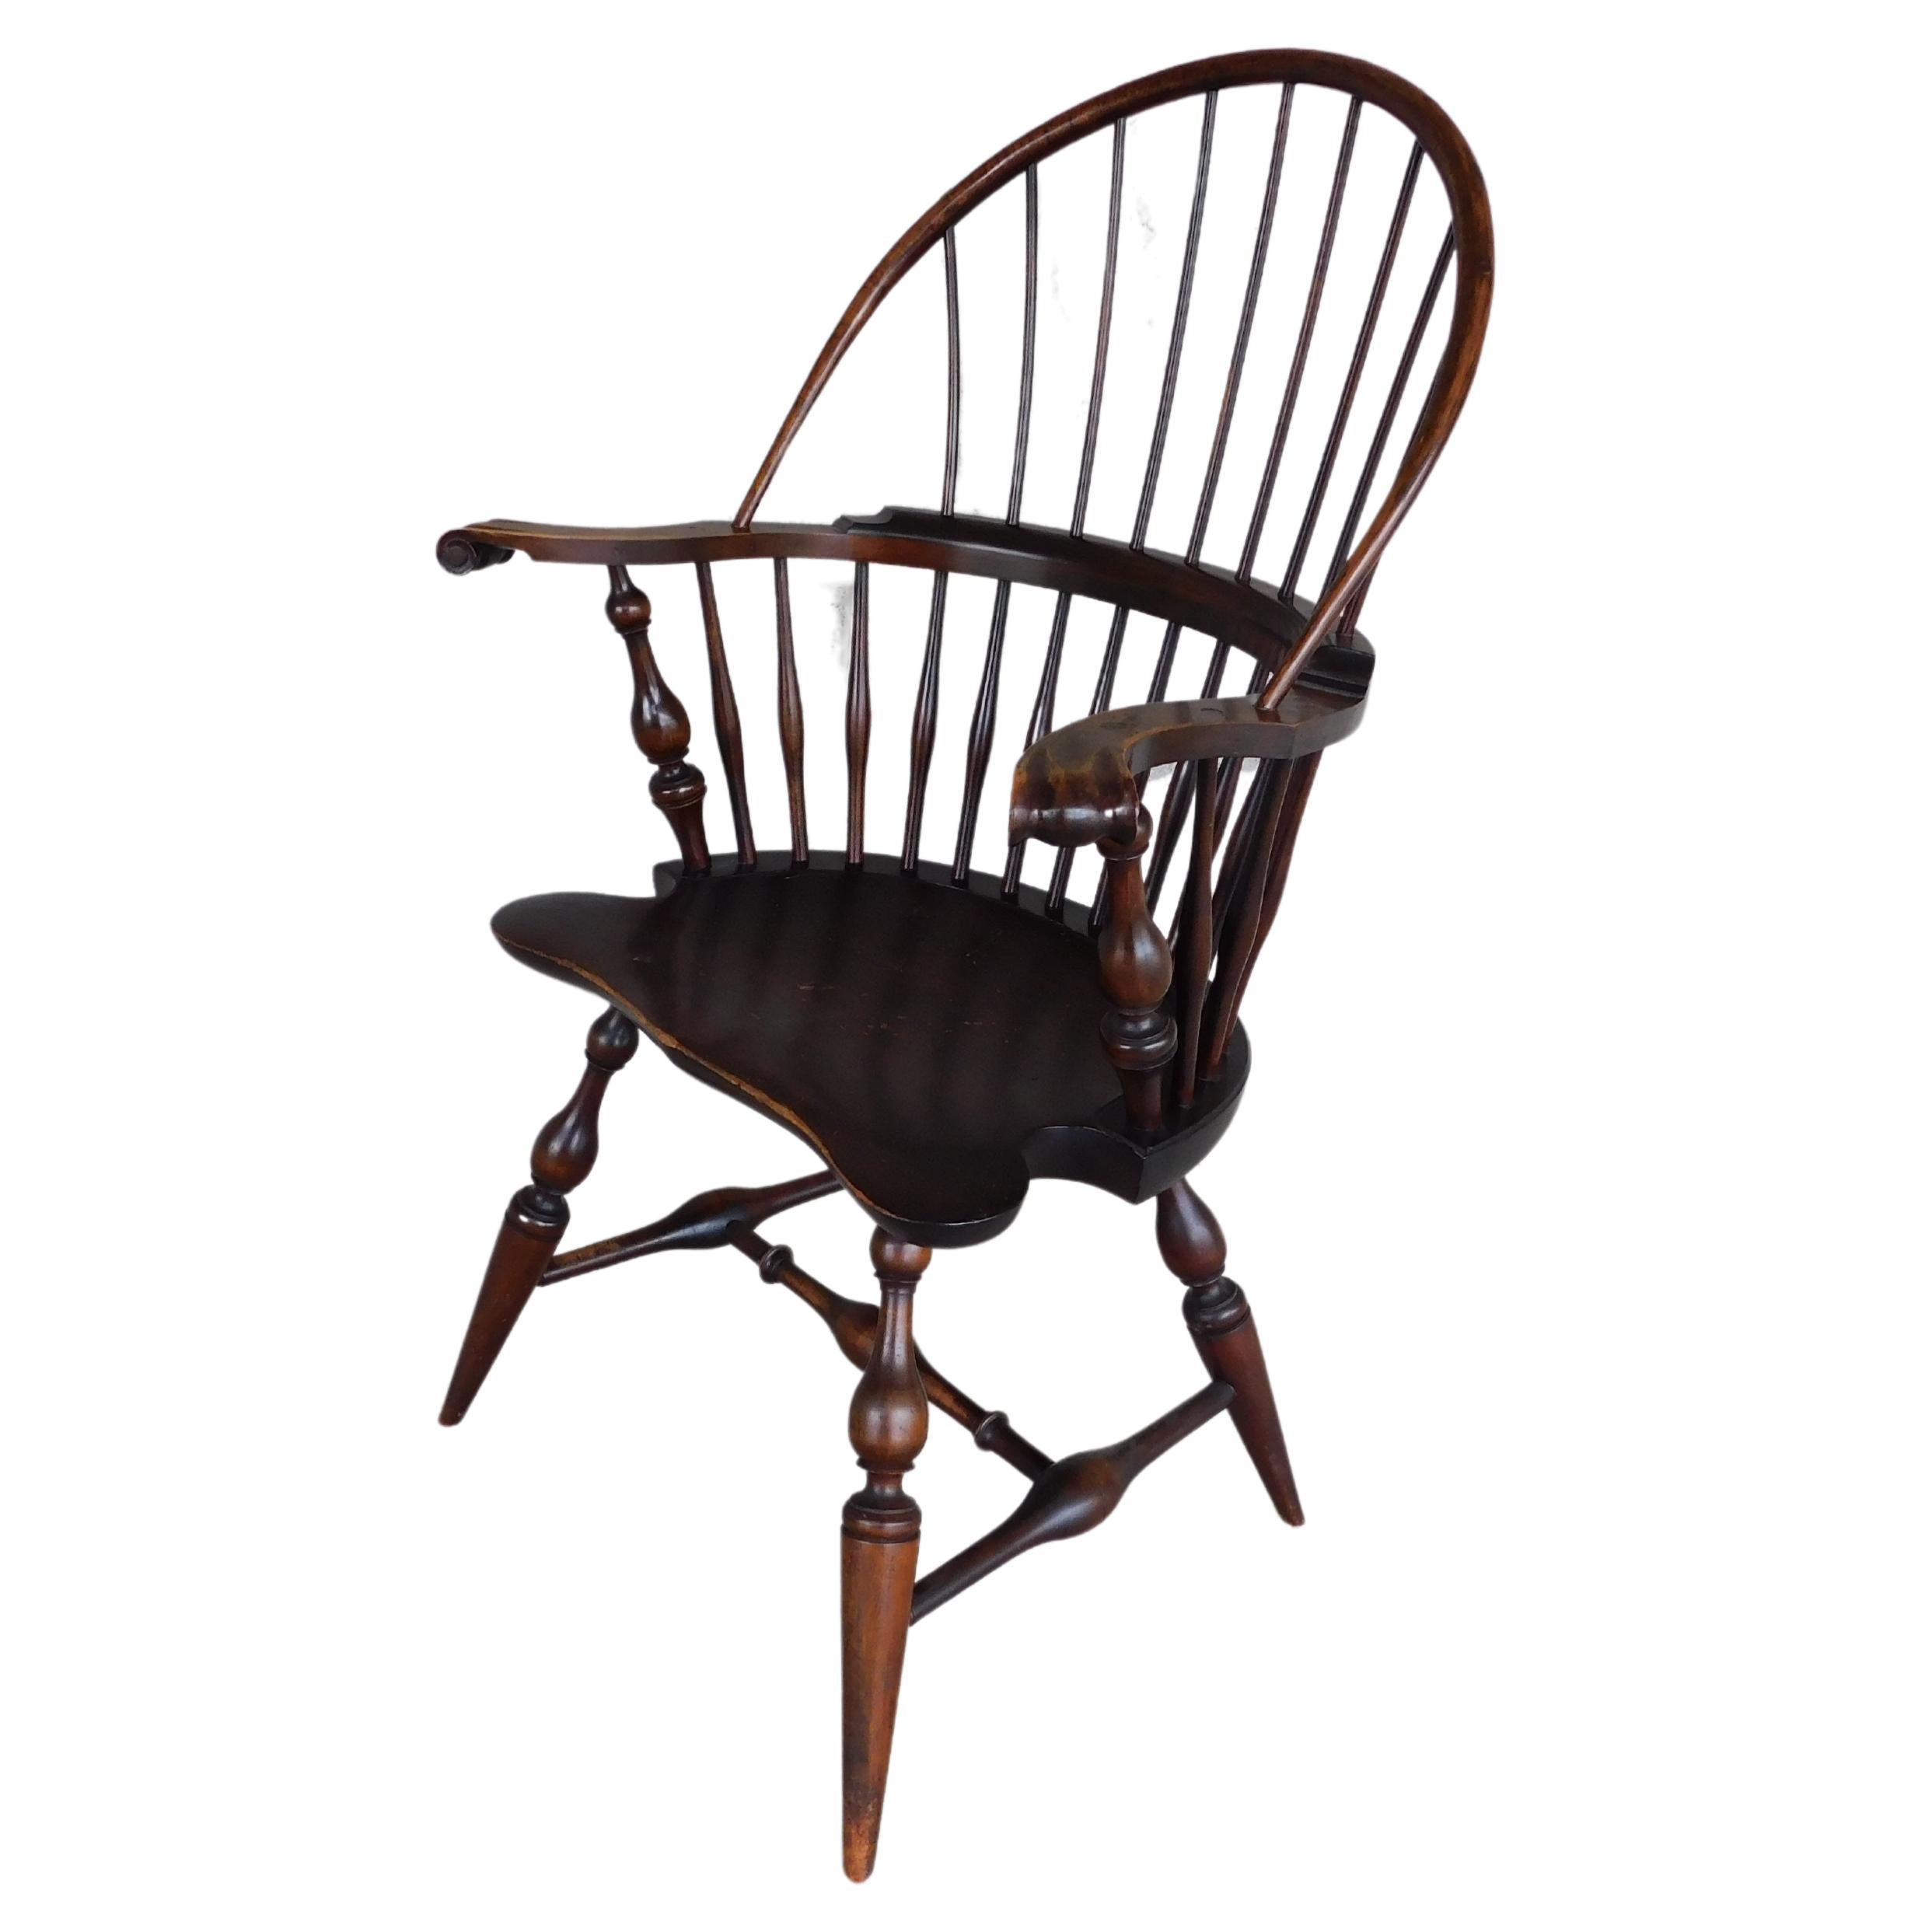 How much is a Windsor chair worth?